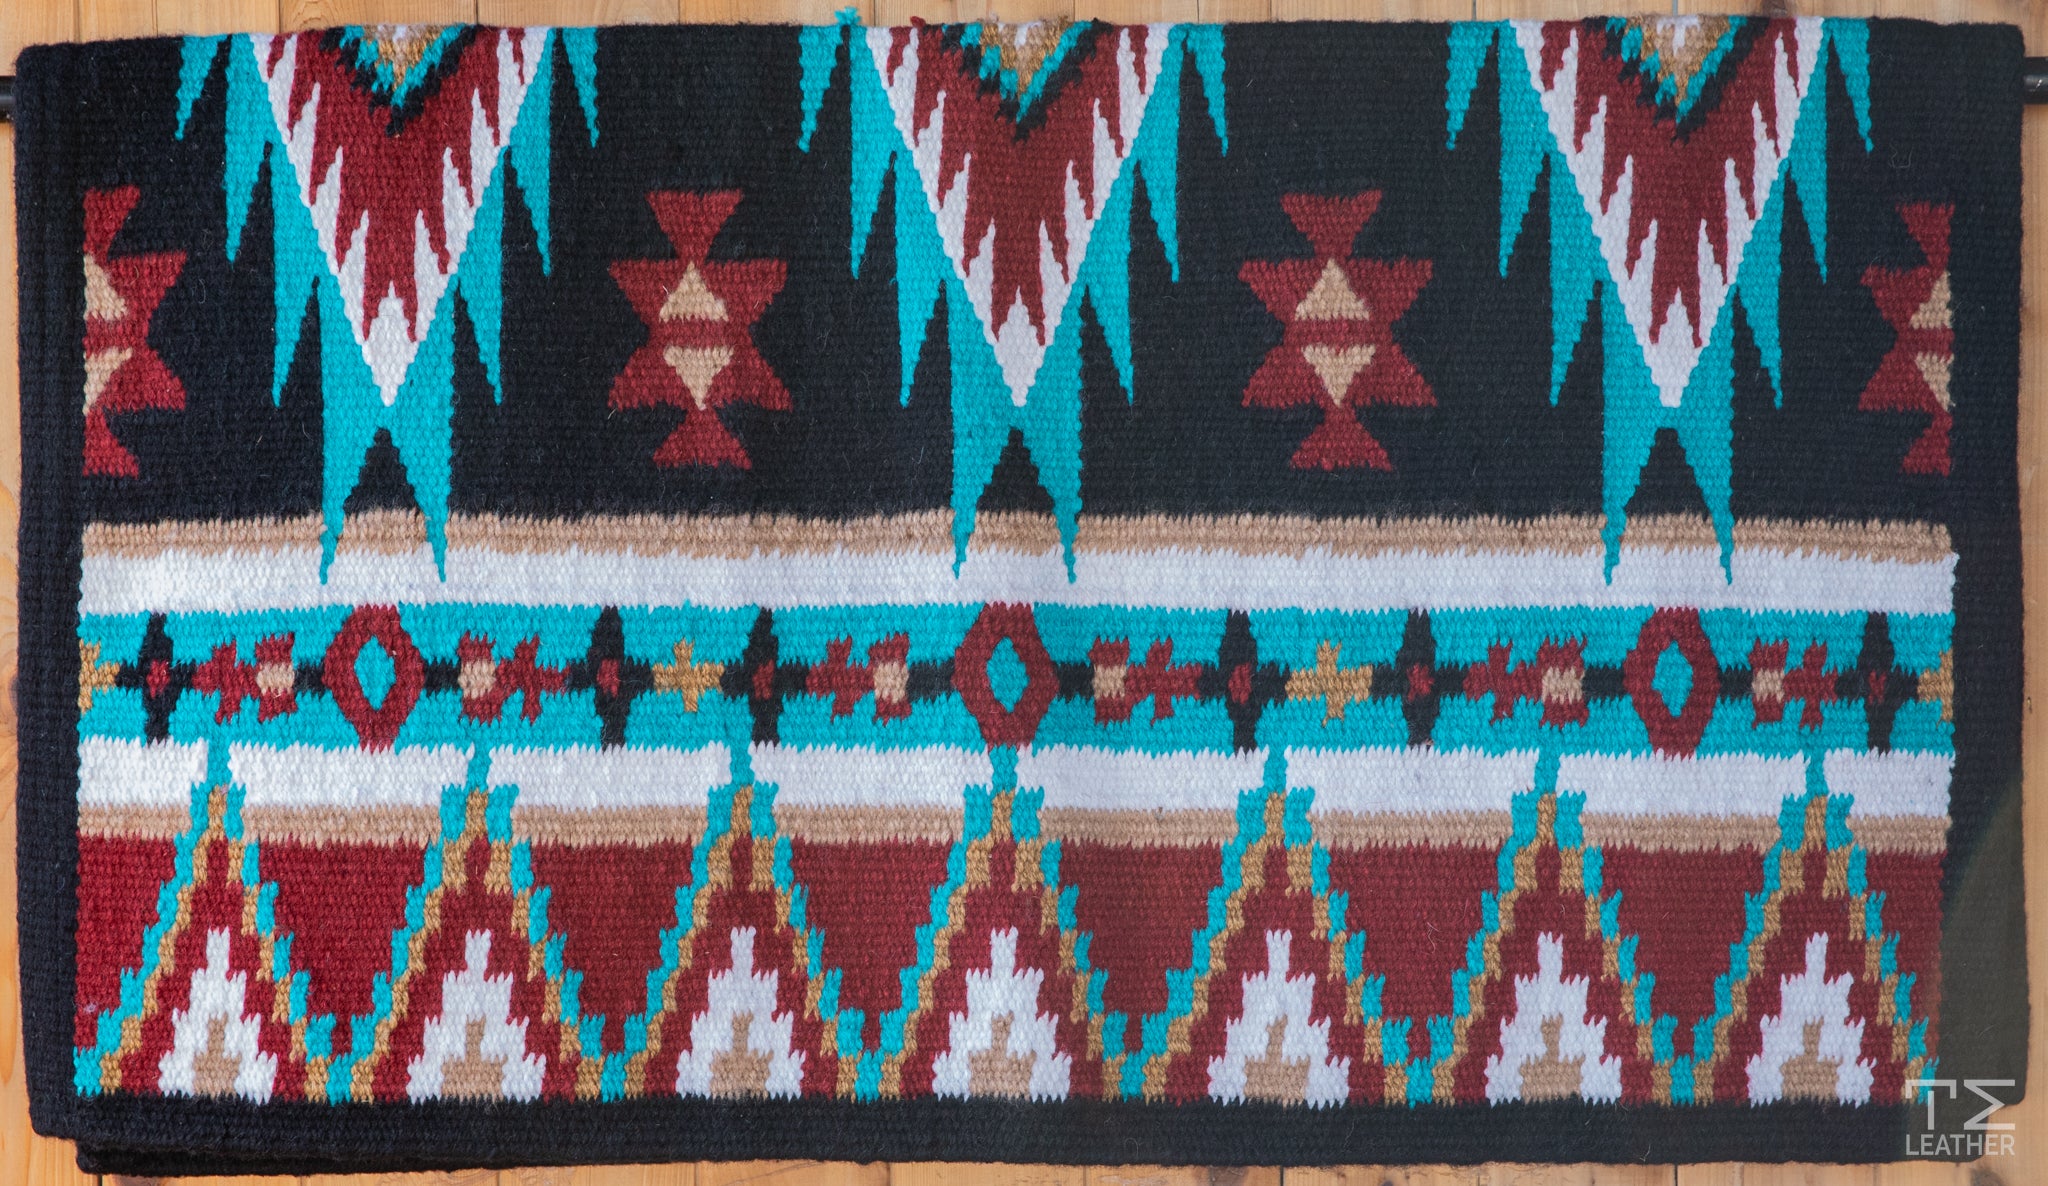 Black, Maroon, Sand, Turquoise w/ White Accents Flat Show Blanket